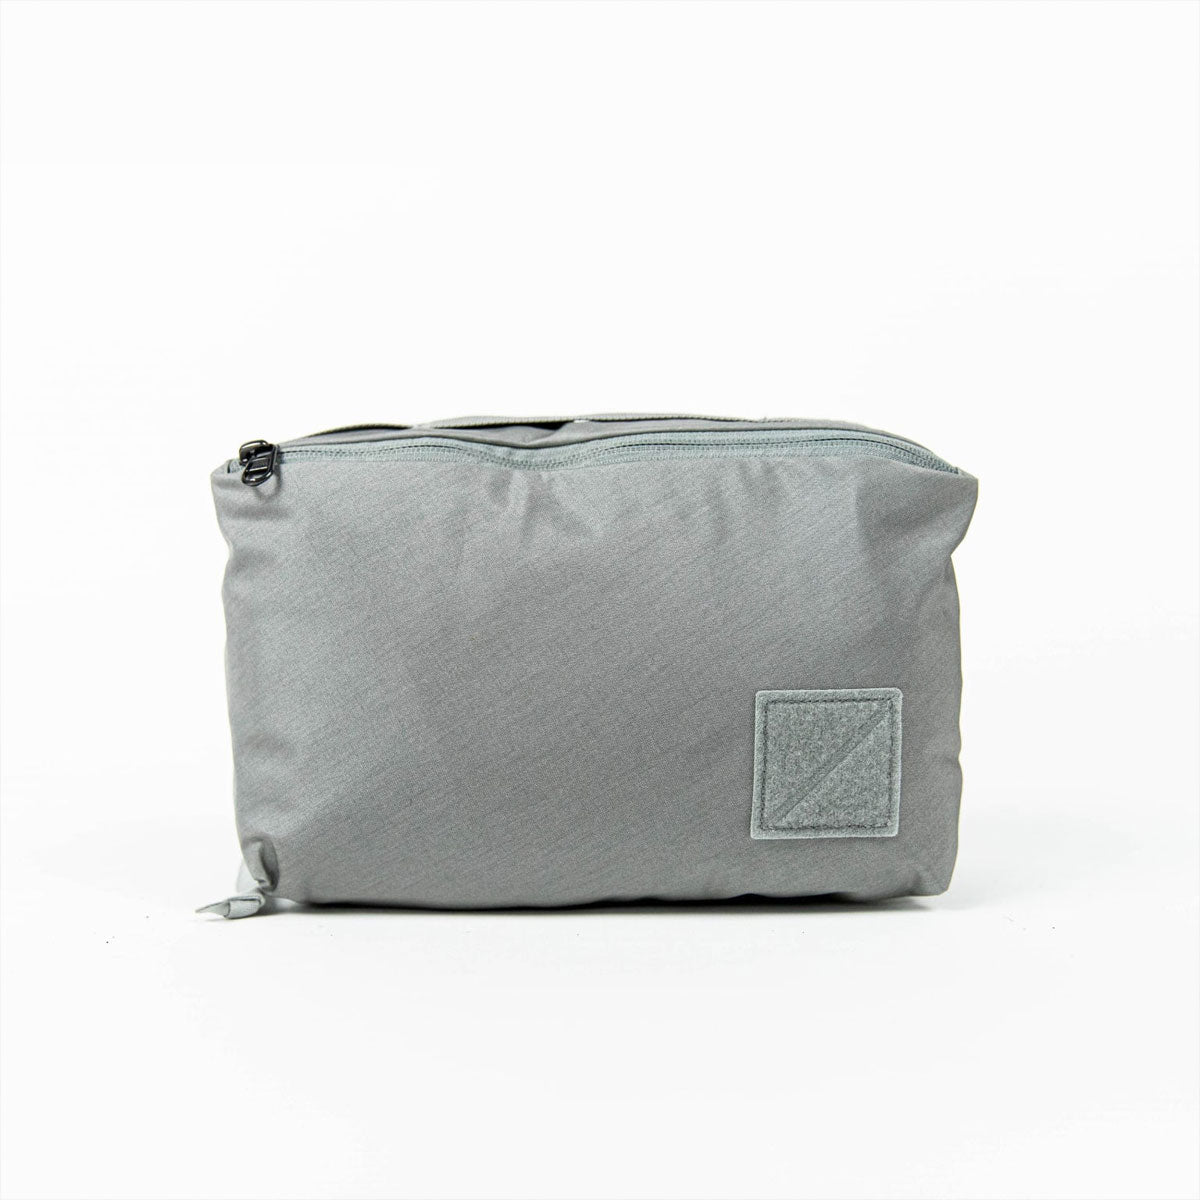 [PO] EVERGOODS : Transit Packing Cube 8L : Standrd Grey